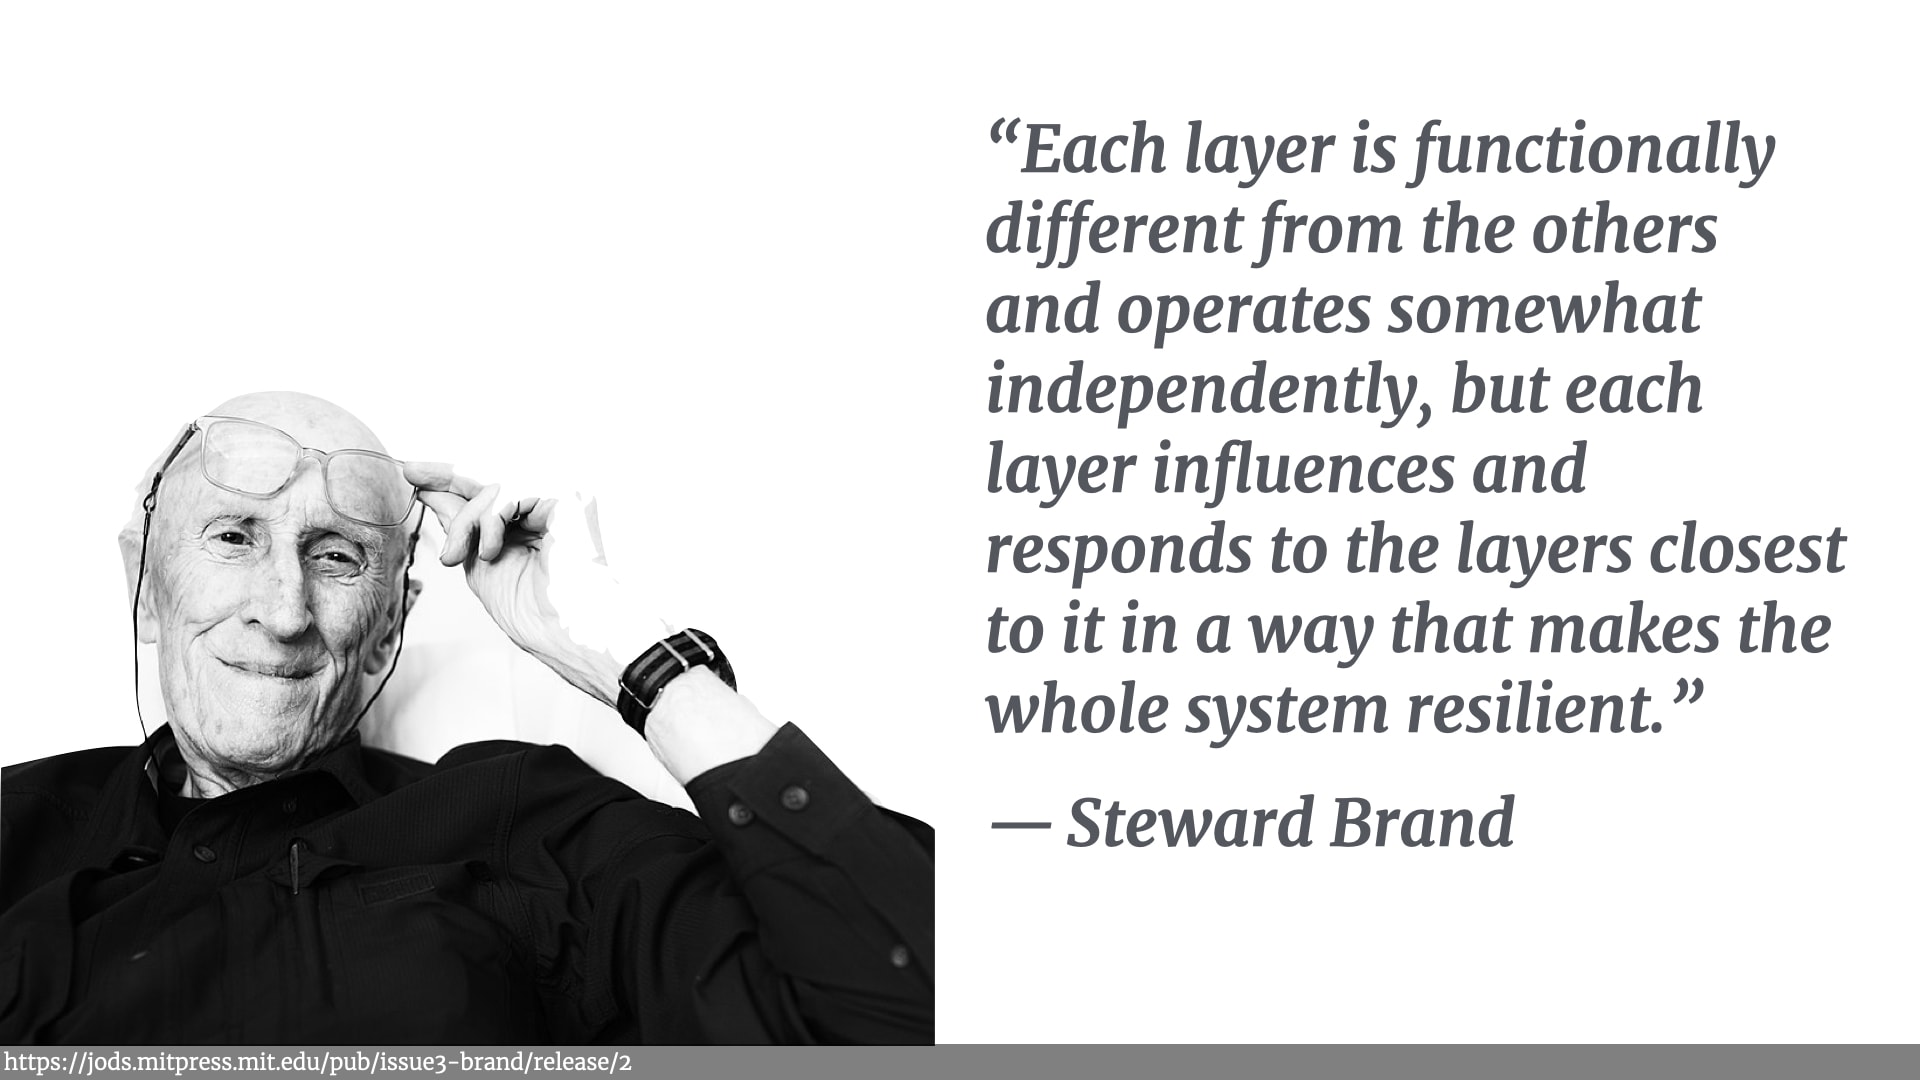 To the left is a black and white picture of Stuart Brand lifting his glasses to his forehead. To the right is his quotation “Each layer is functionally different from the others and operates somewhat independently, but each layer influences and responds to the layers closest to it in a way that makes the whole system resilient.”